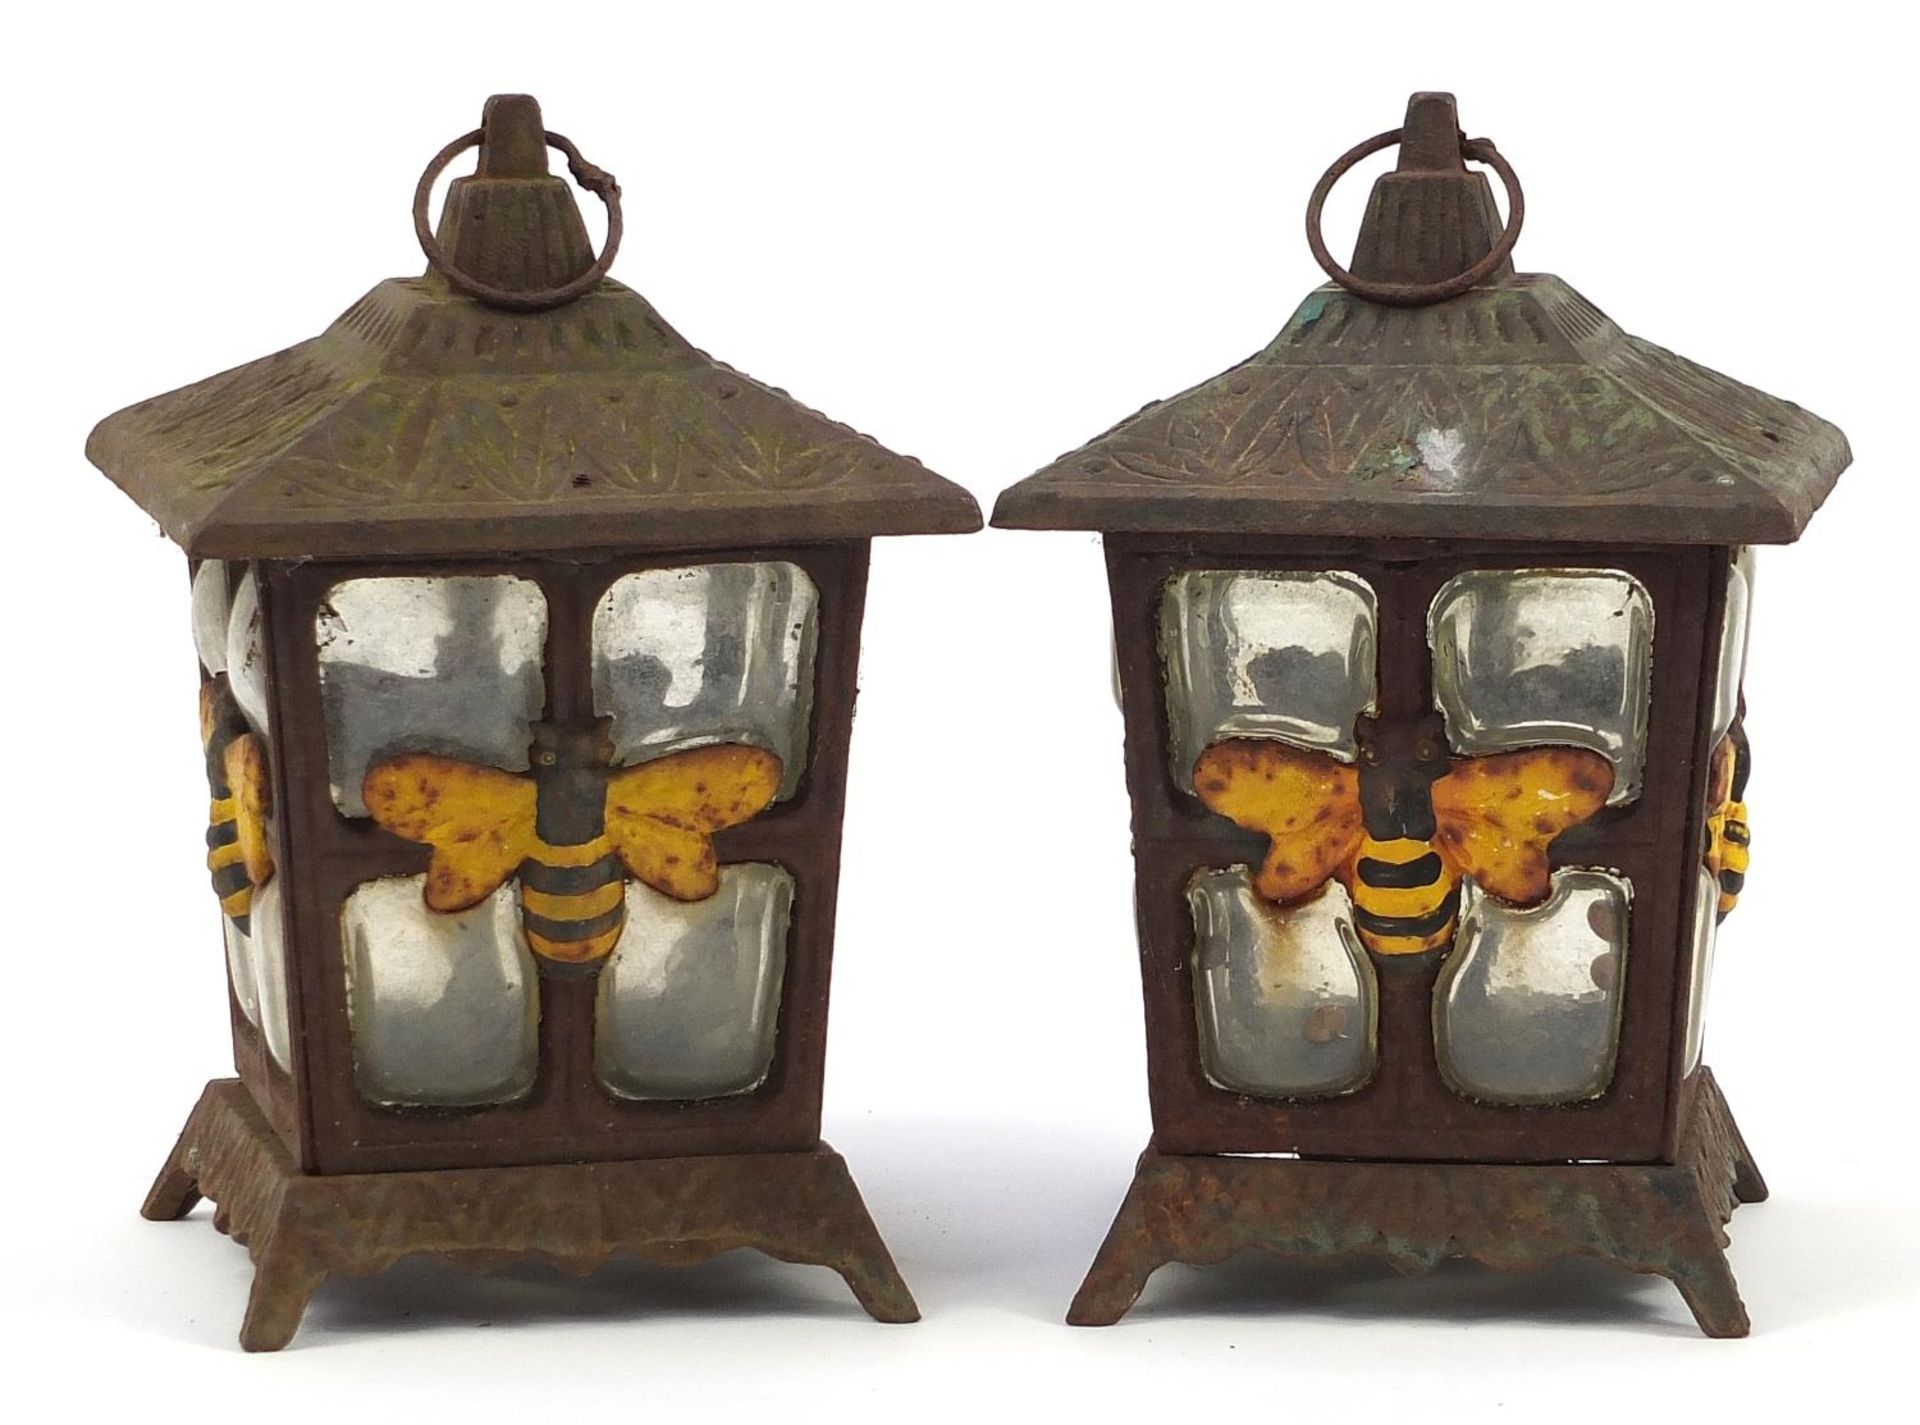 Pair of cast iron and glass garden tealight lanterns decorated with bumble bees, 23cm high - Image 2 of 3